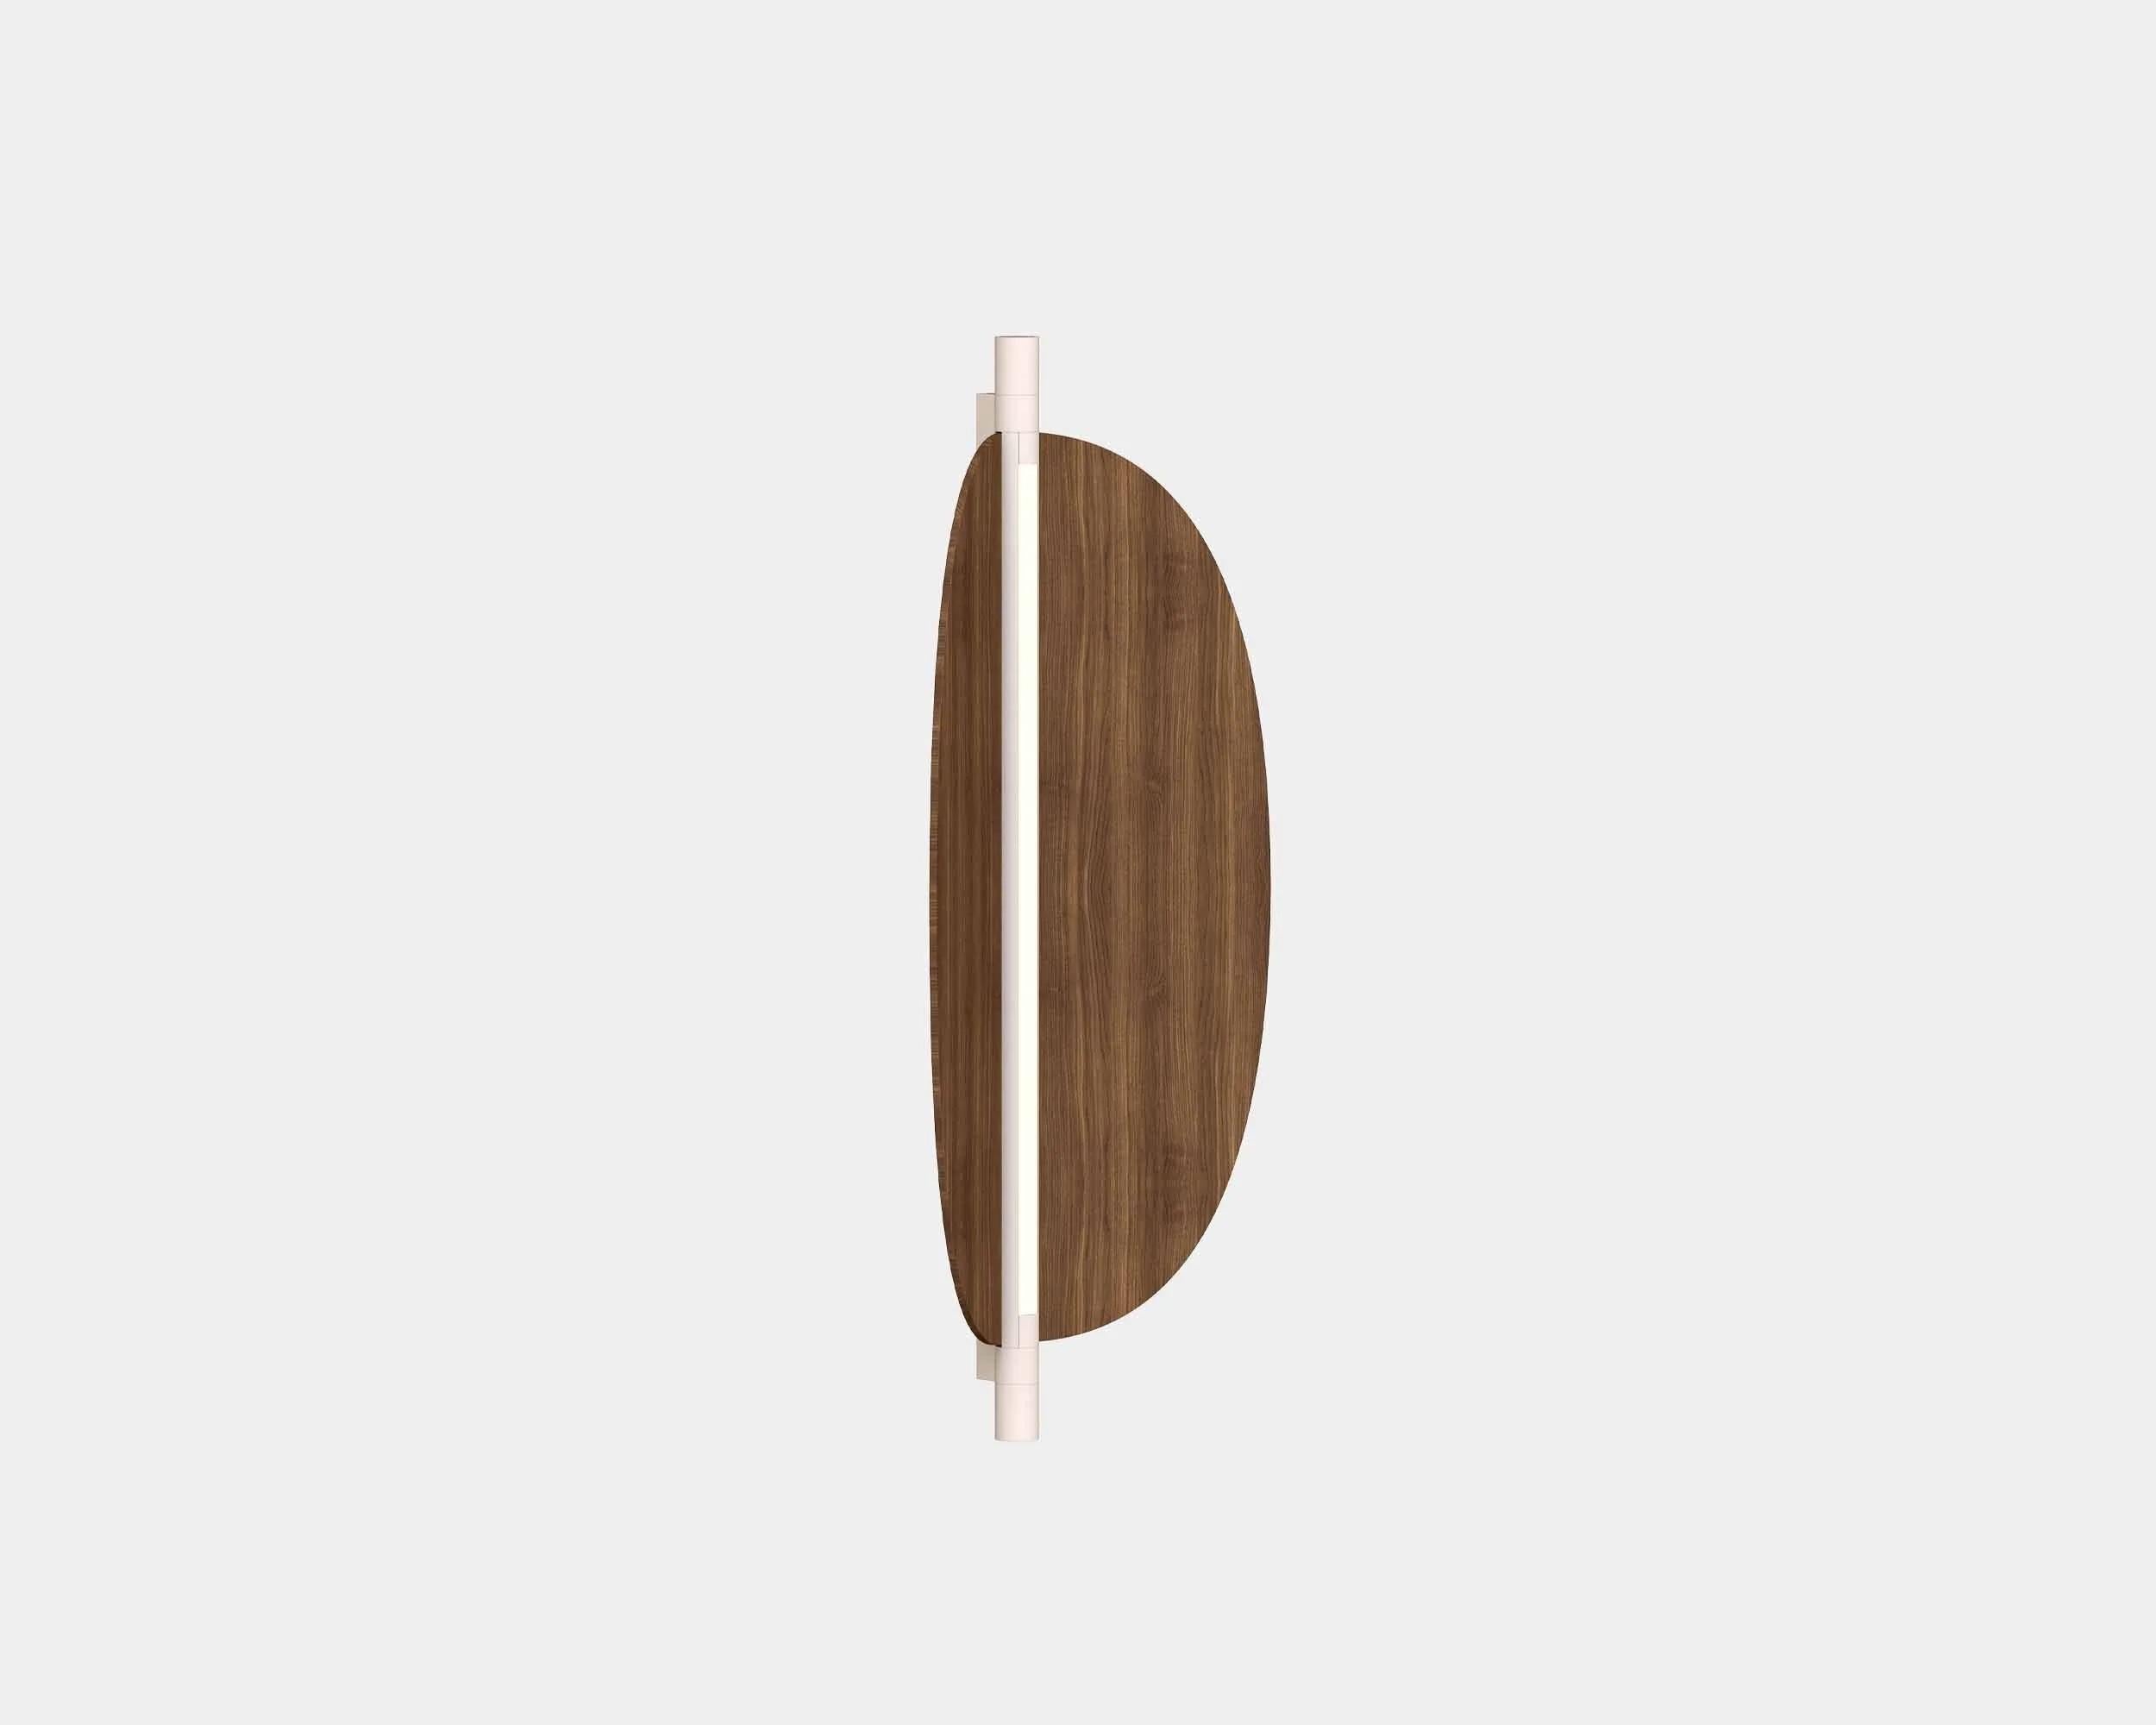 Contemporary Wall Lamp 'Thula 562.43' by Federica Biasi x Tooy, Beige + Oak For Sale 7